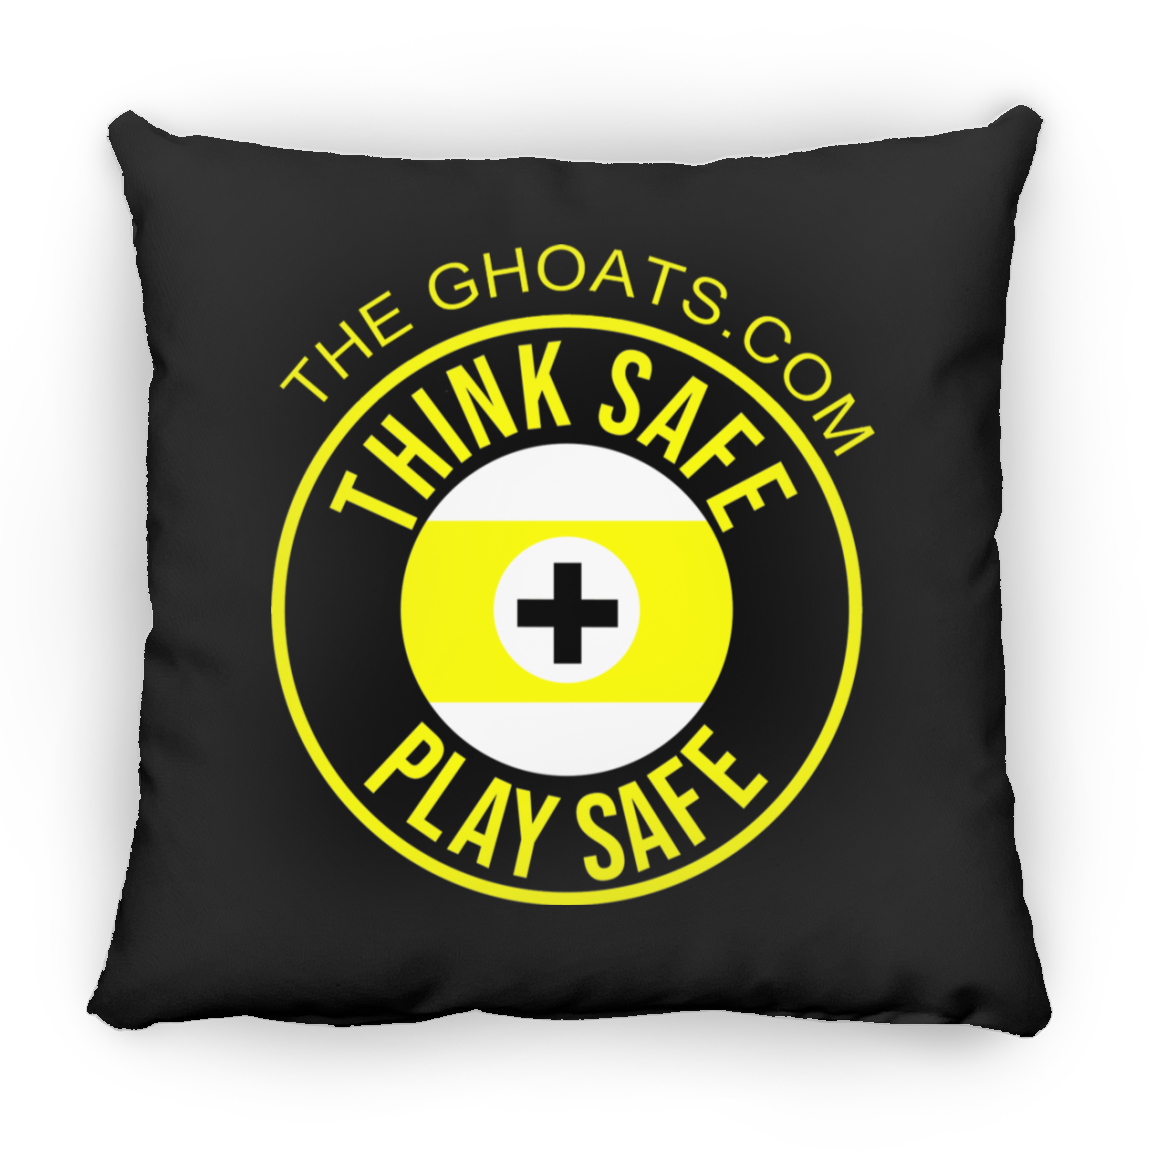 The GHOATS Custom Design. #31 Think Safe. Play Safe. Large Square Pillow